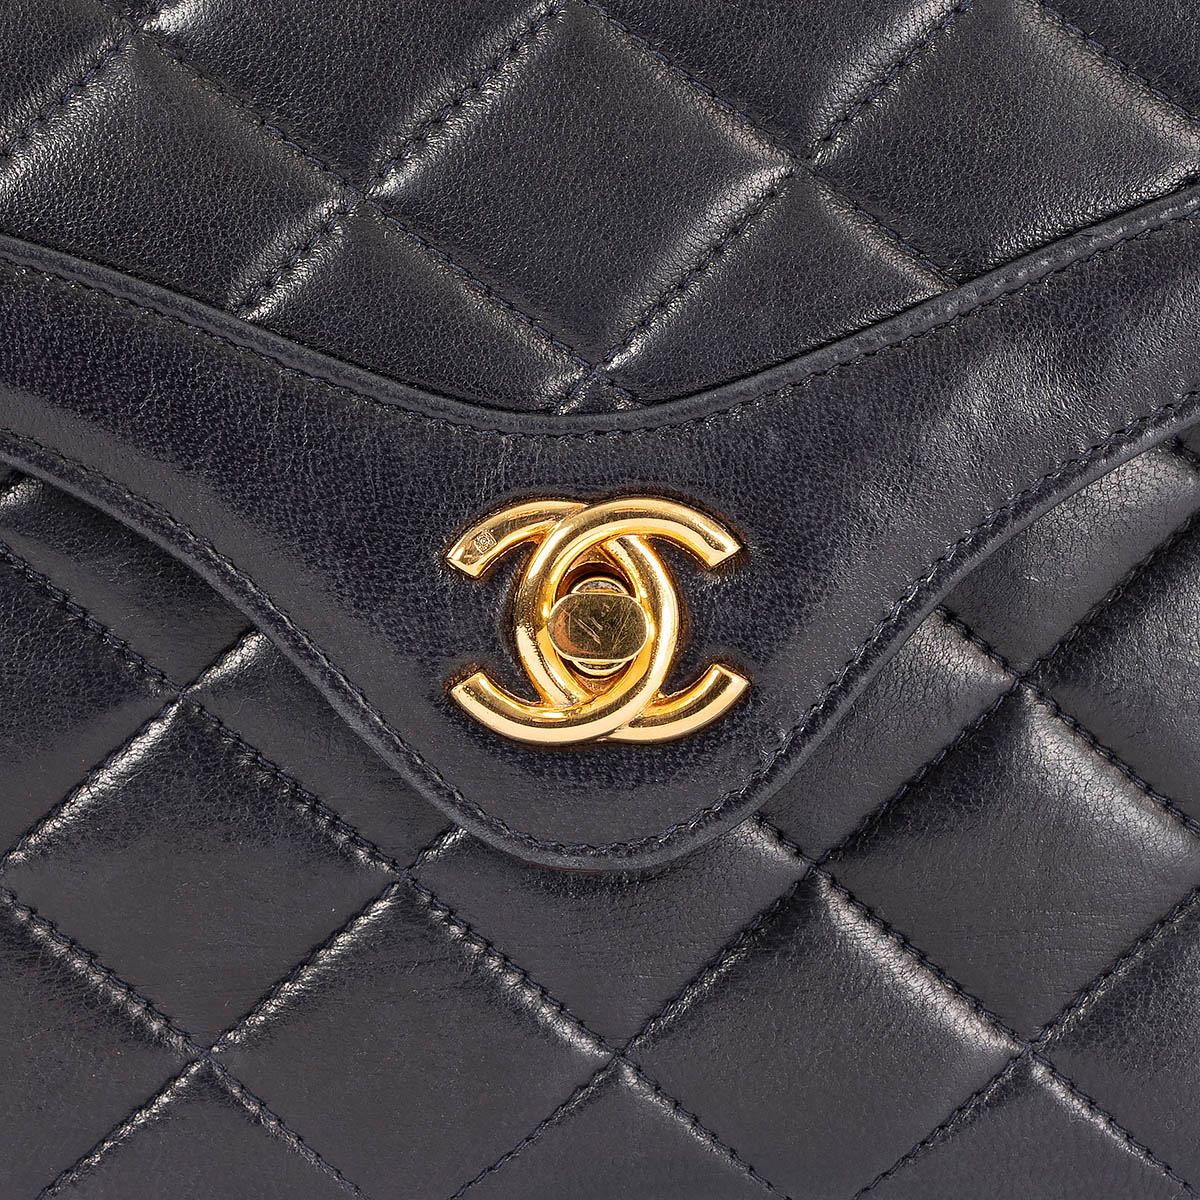 CHANEL midnight blue leather 1994 - 96 QUILTED FLAP Shoulder Bag 3